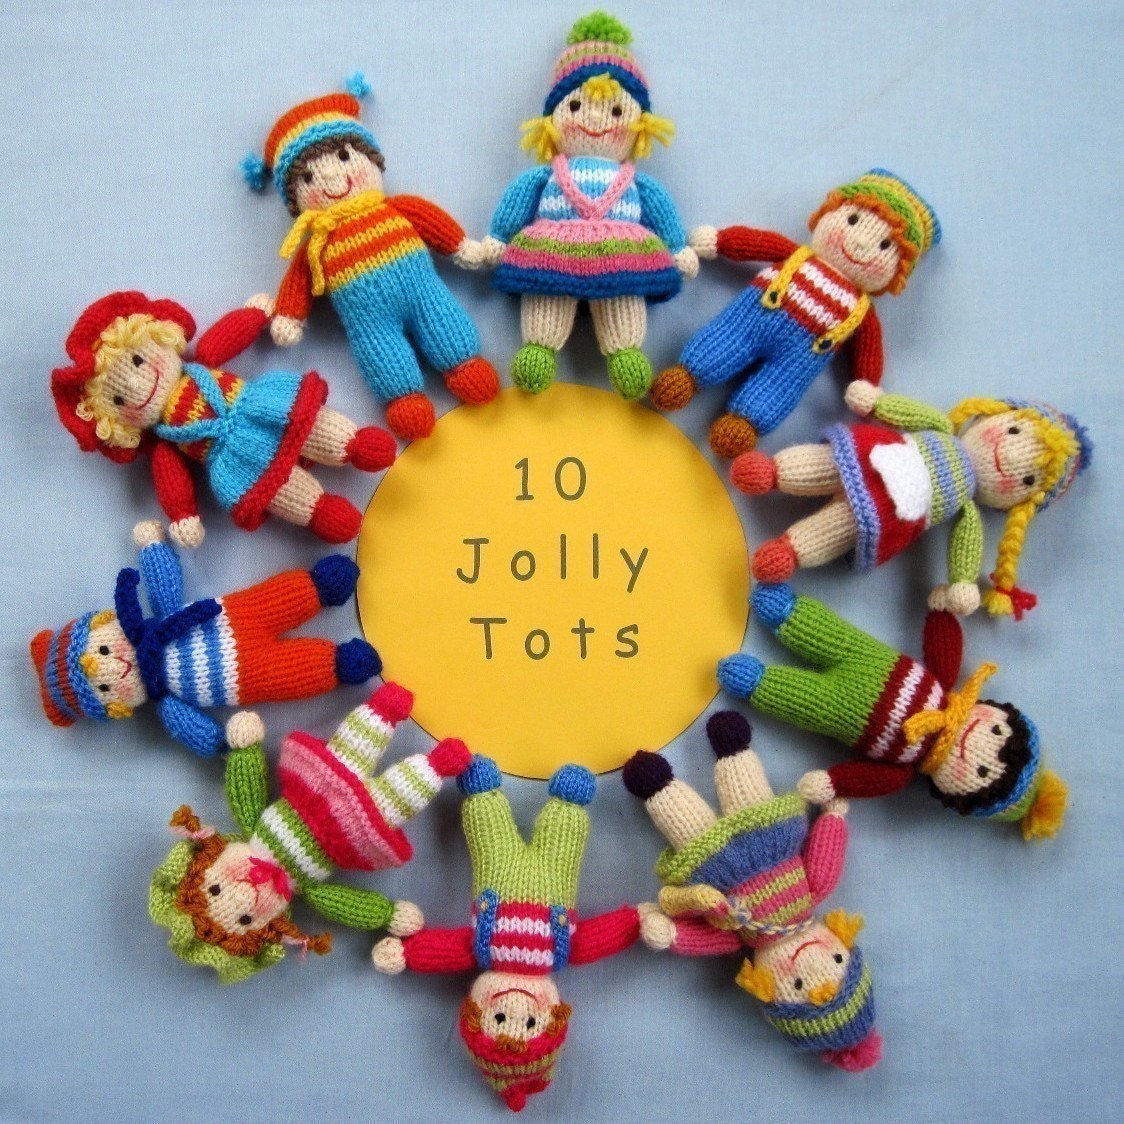 JOLLY TOTS - toy dolls - PDF email knitting pattern